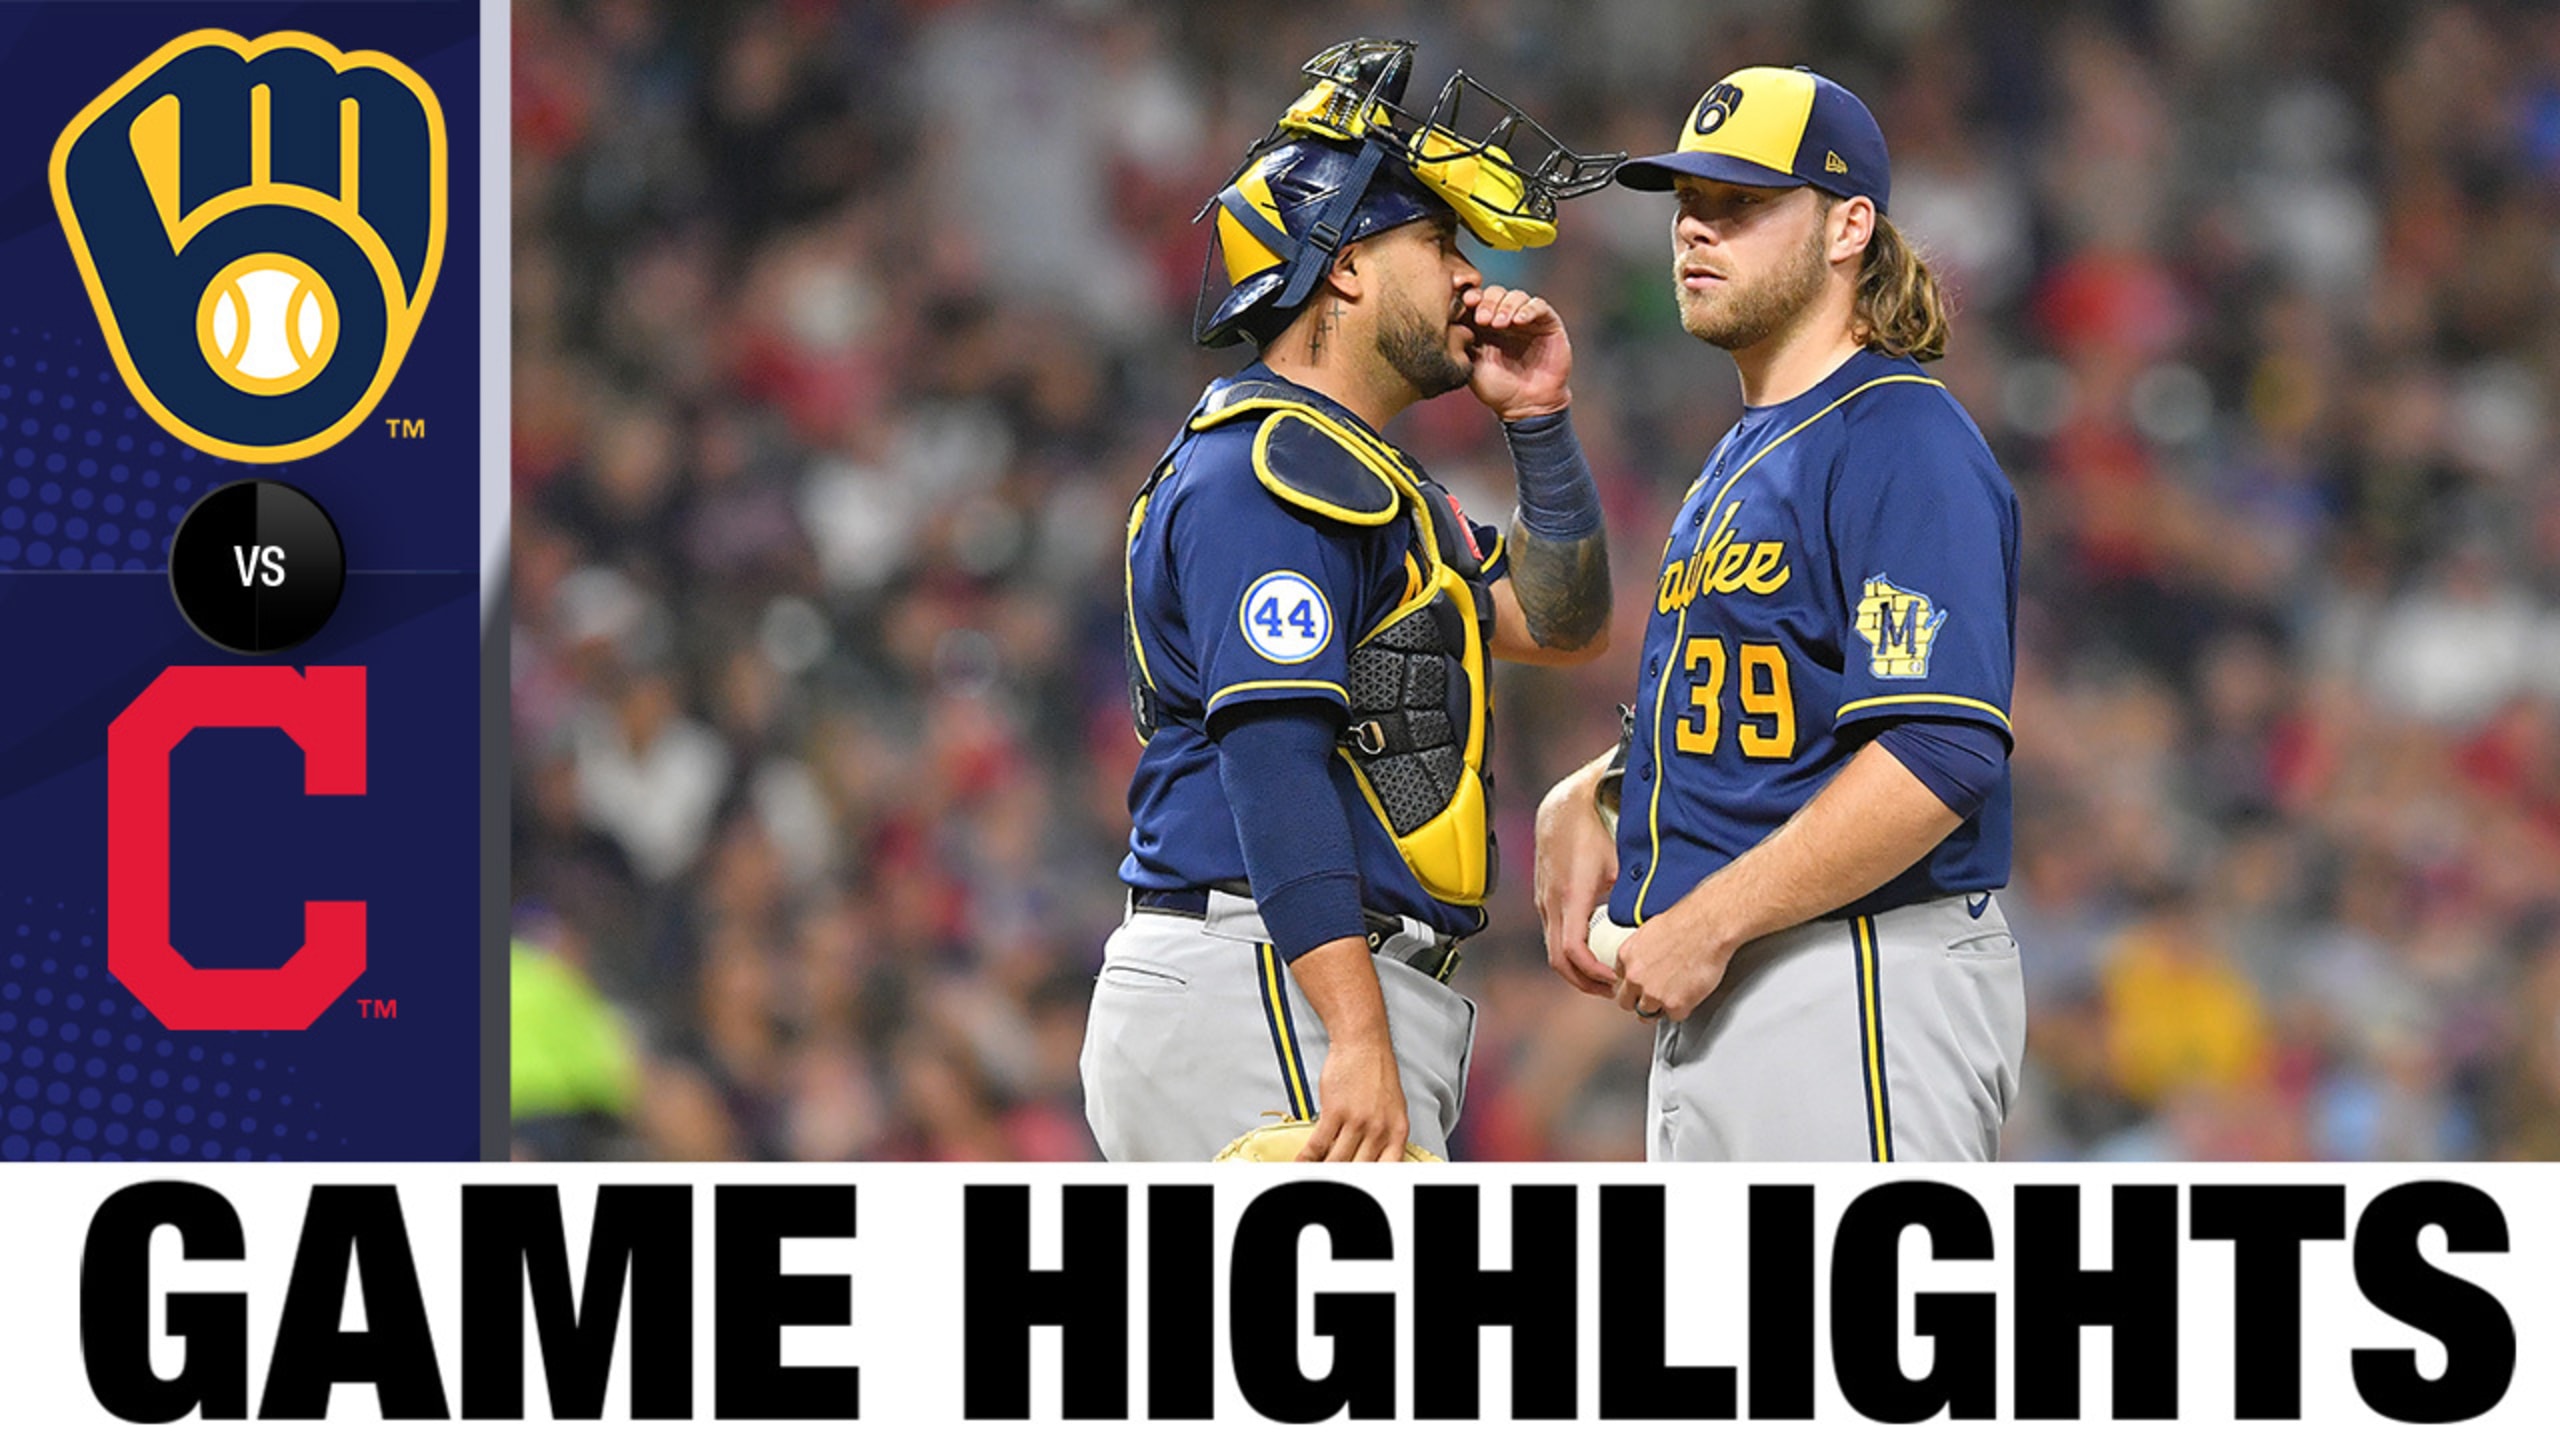 Burnes and Hader combine for second no-hitter in Brewers franchise